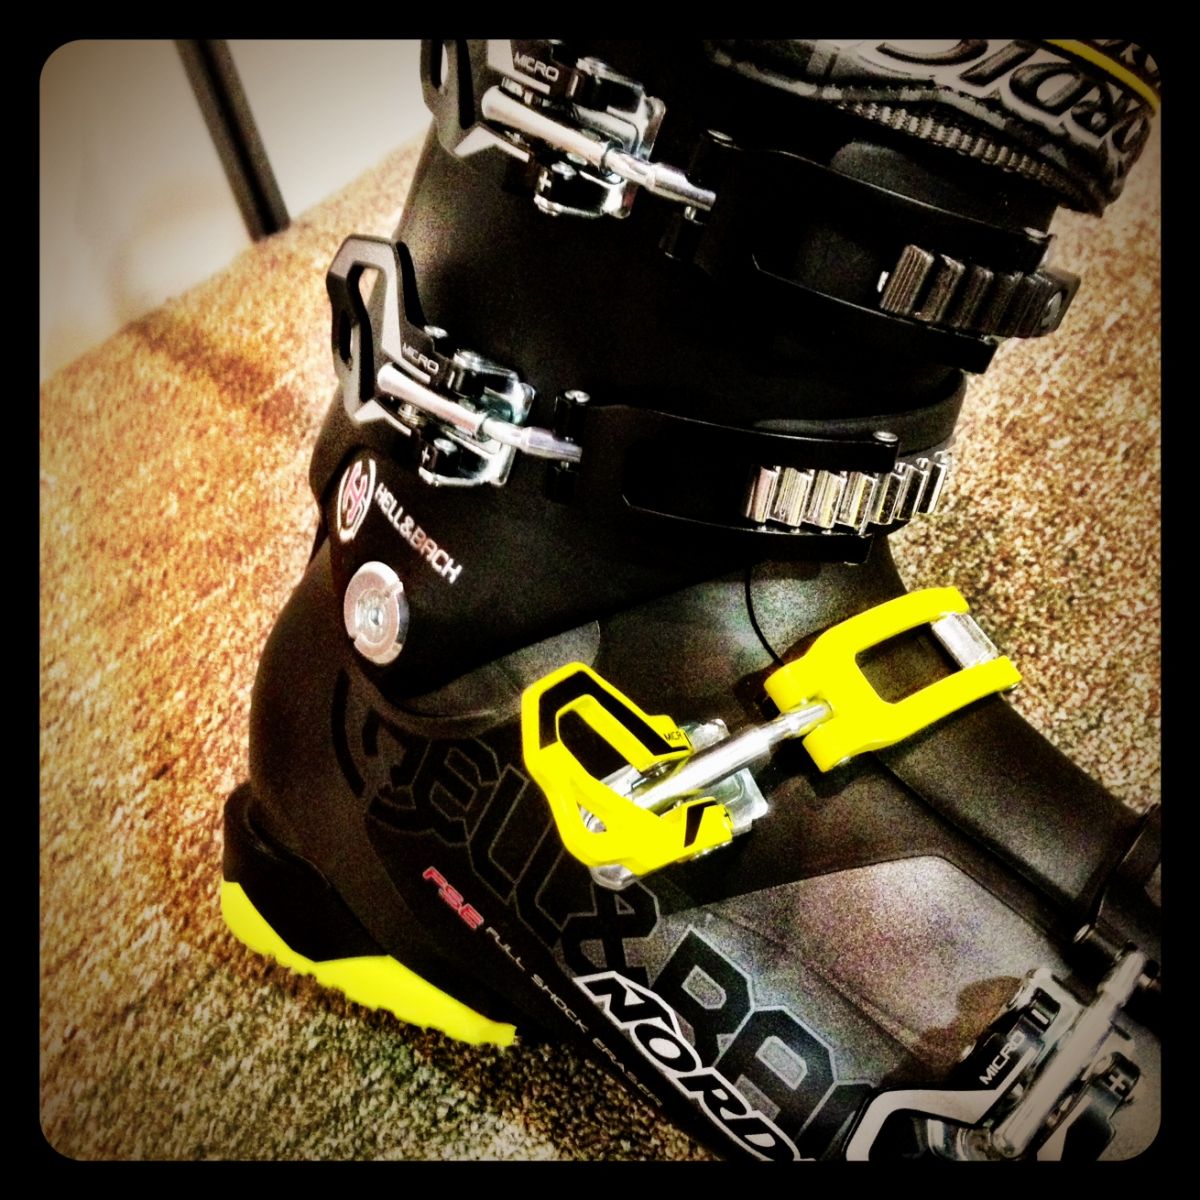 Nordica Hell and Back: Ski and Boot Review | The Ski Monster